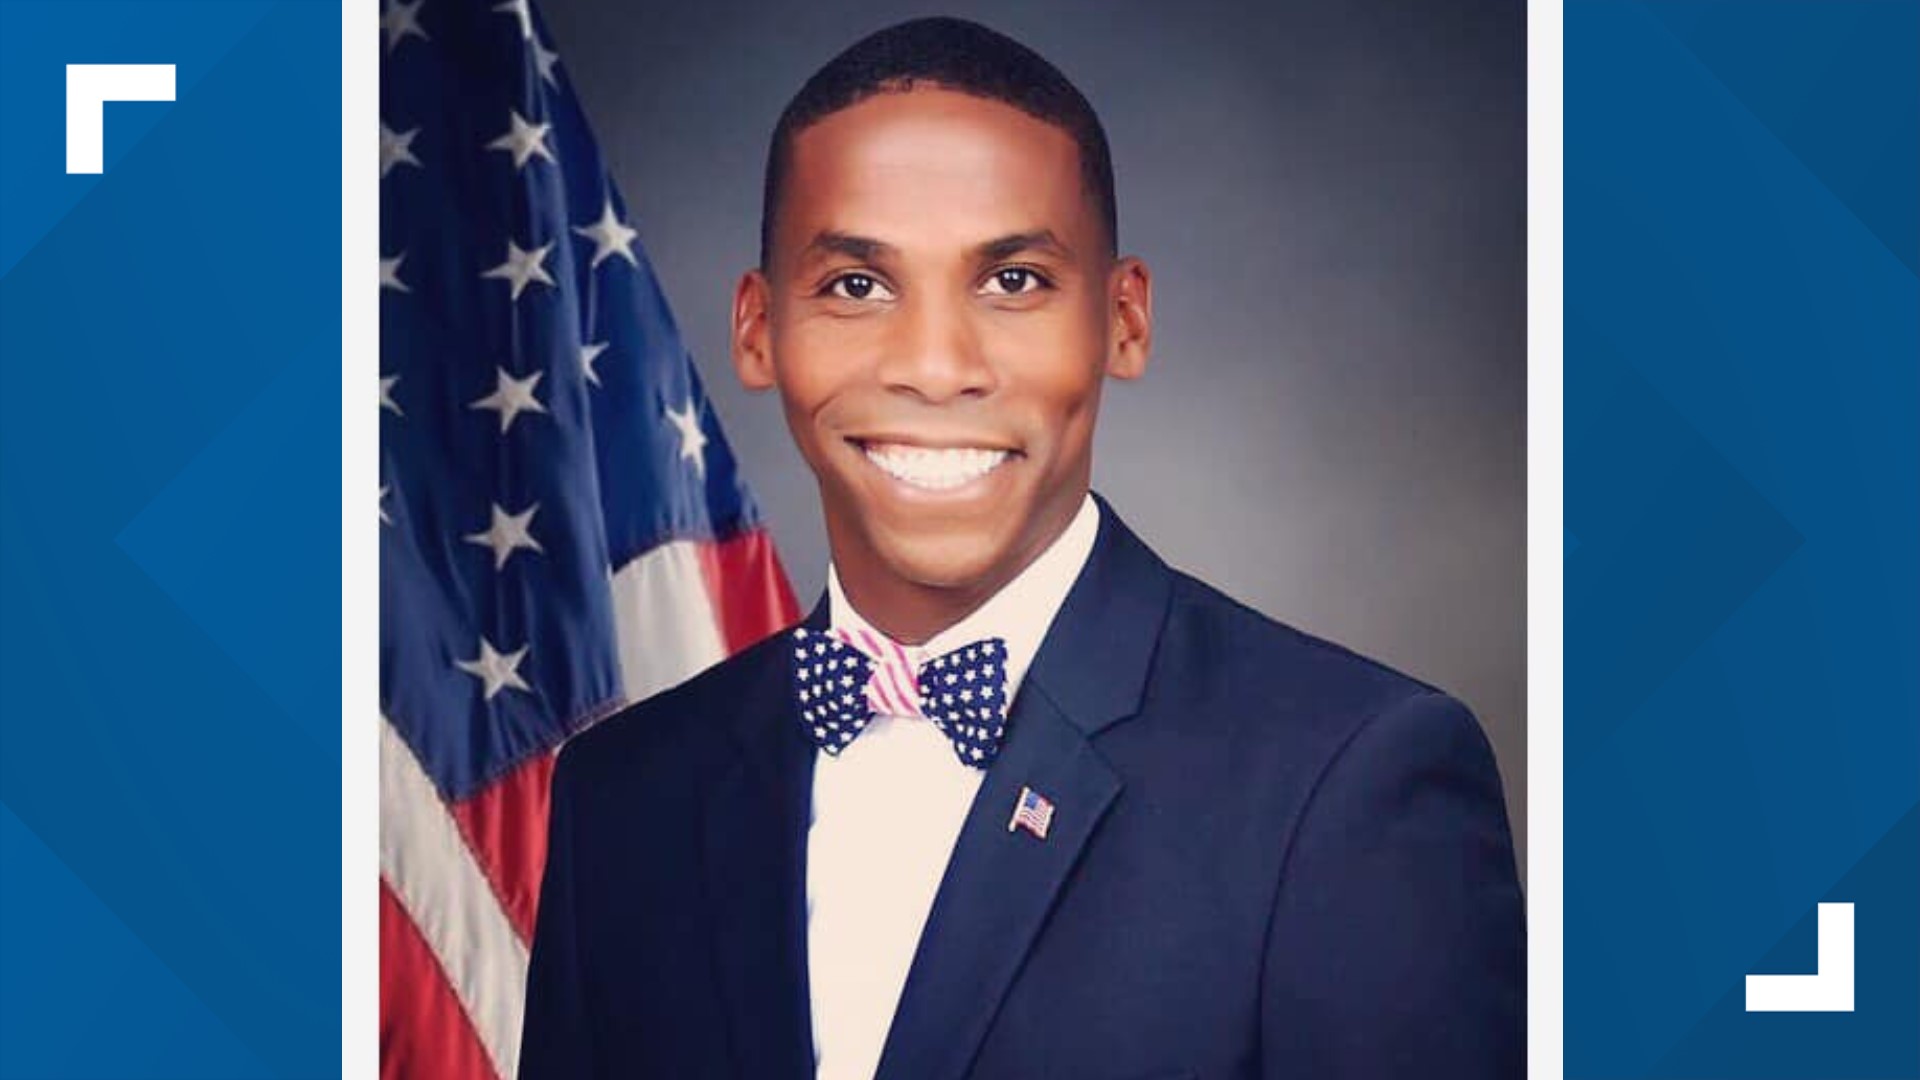 Following two terms serving on the Killeen City Council, Gregory Johnson is running to replace Claudia Brown as Justice of the Peace Precinct 4, Place 1.